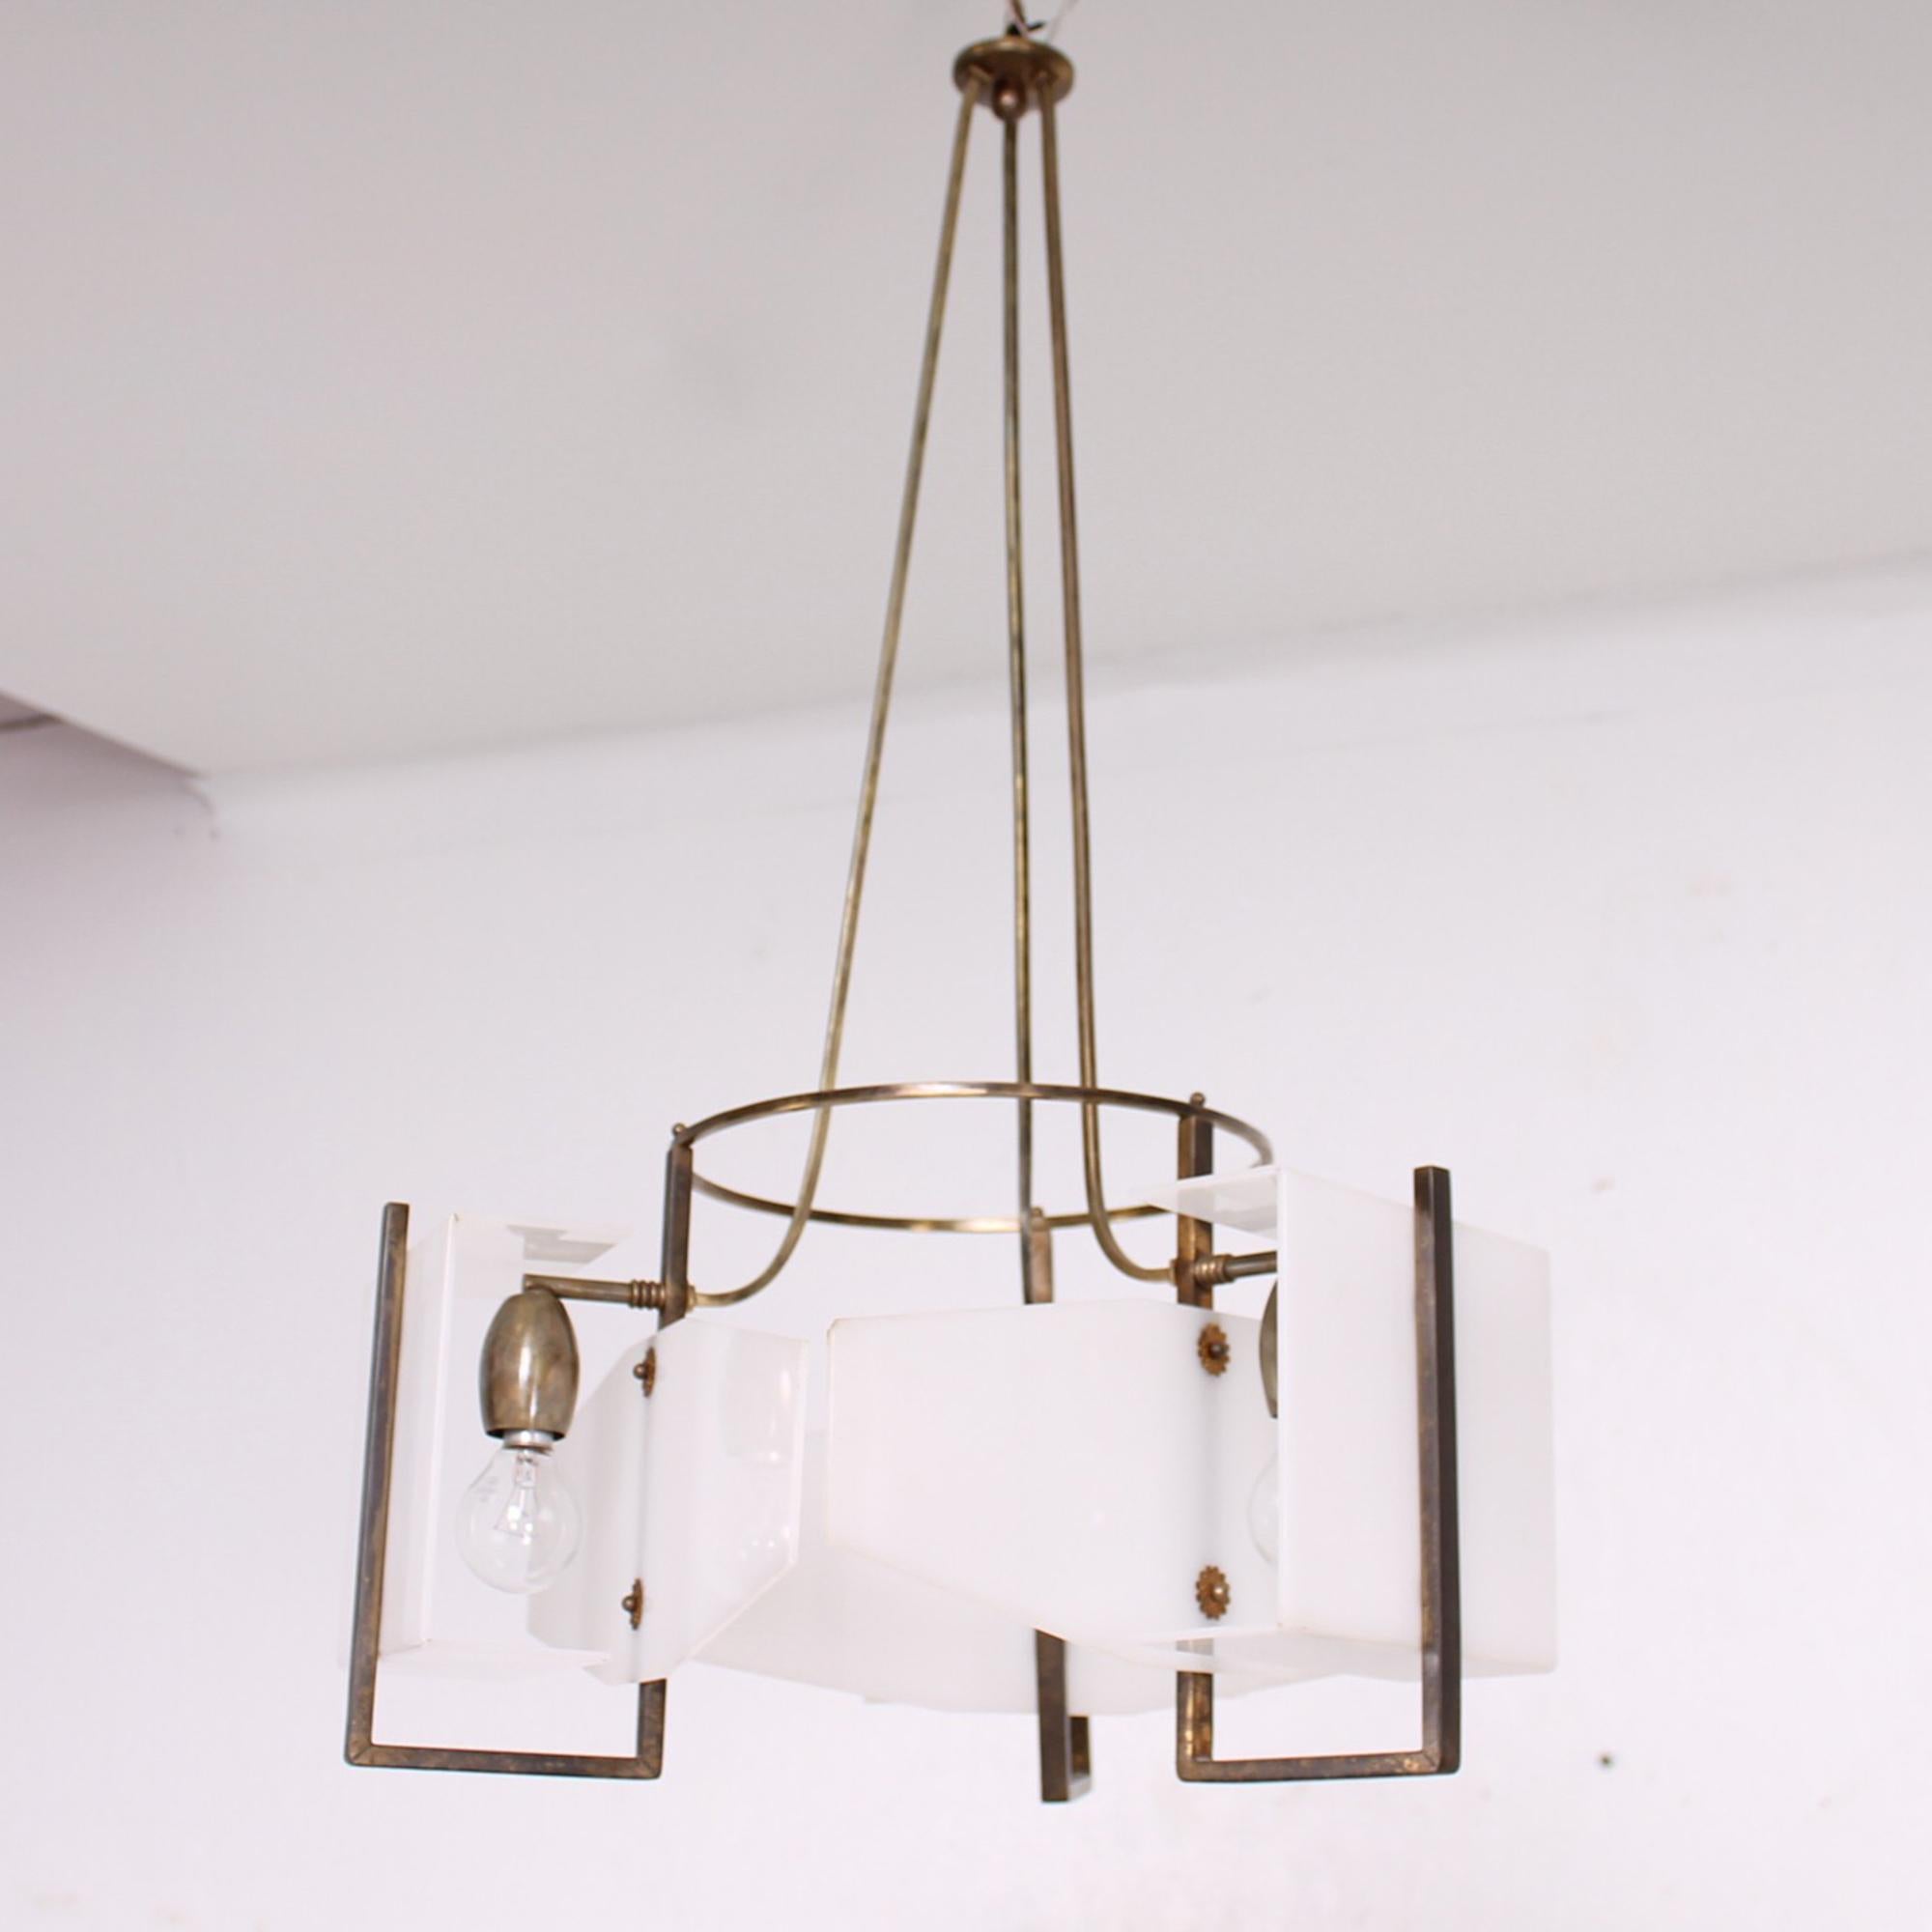 AMBIANIC presents
Geometric Lines in this vintage Italian Chandelier Italy 1950s.
Constructed in Brass & White Plexiglass.
Chandelier is unmarked. In the Italian modern style of Arredoluce from Oluce.
Brass features a beautiful warm brown patina